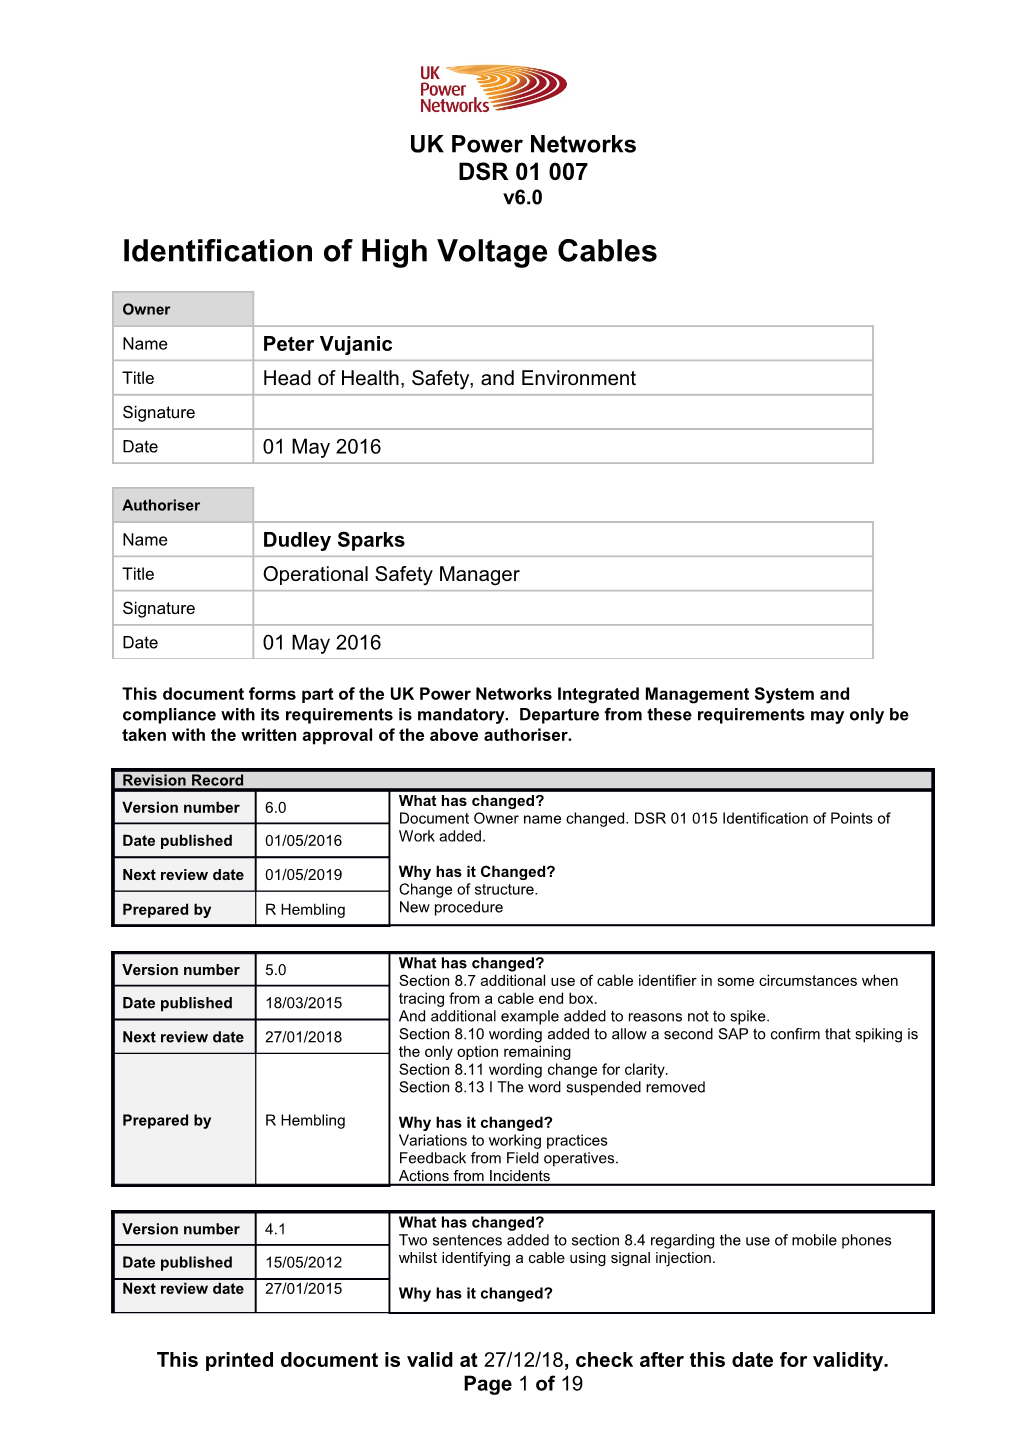 DSR 01 007 Identification of High Voltage Cables